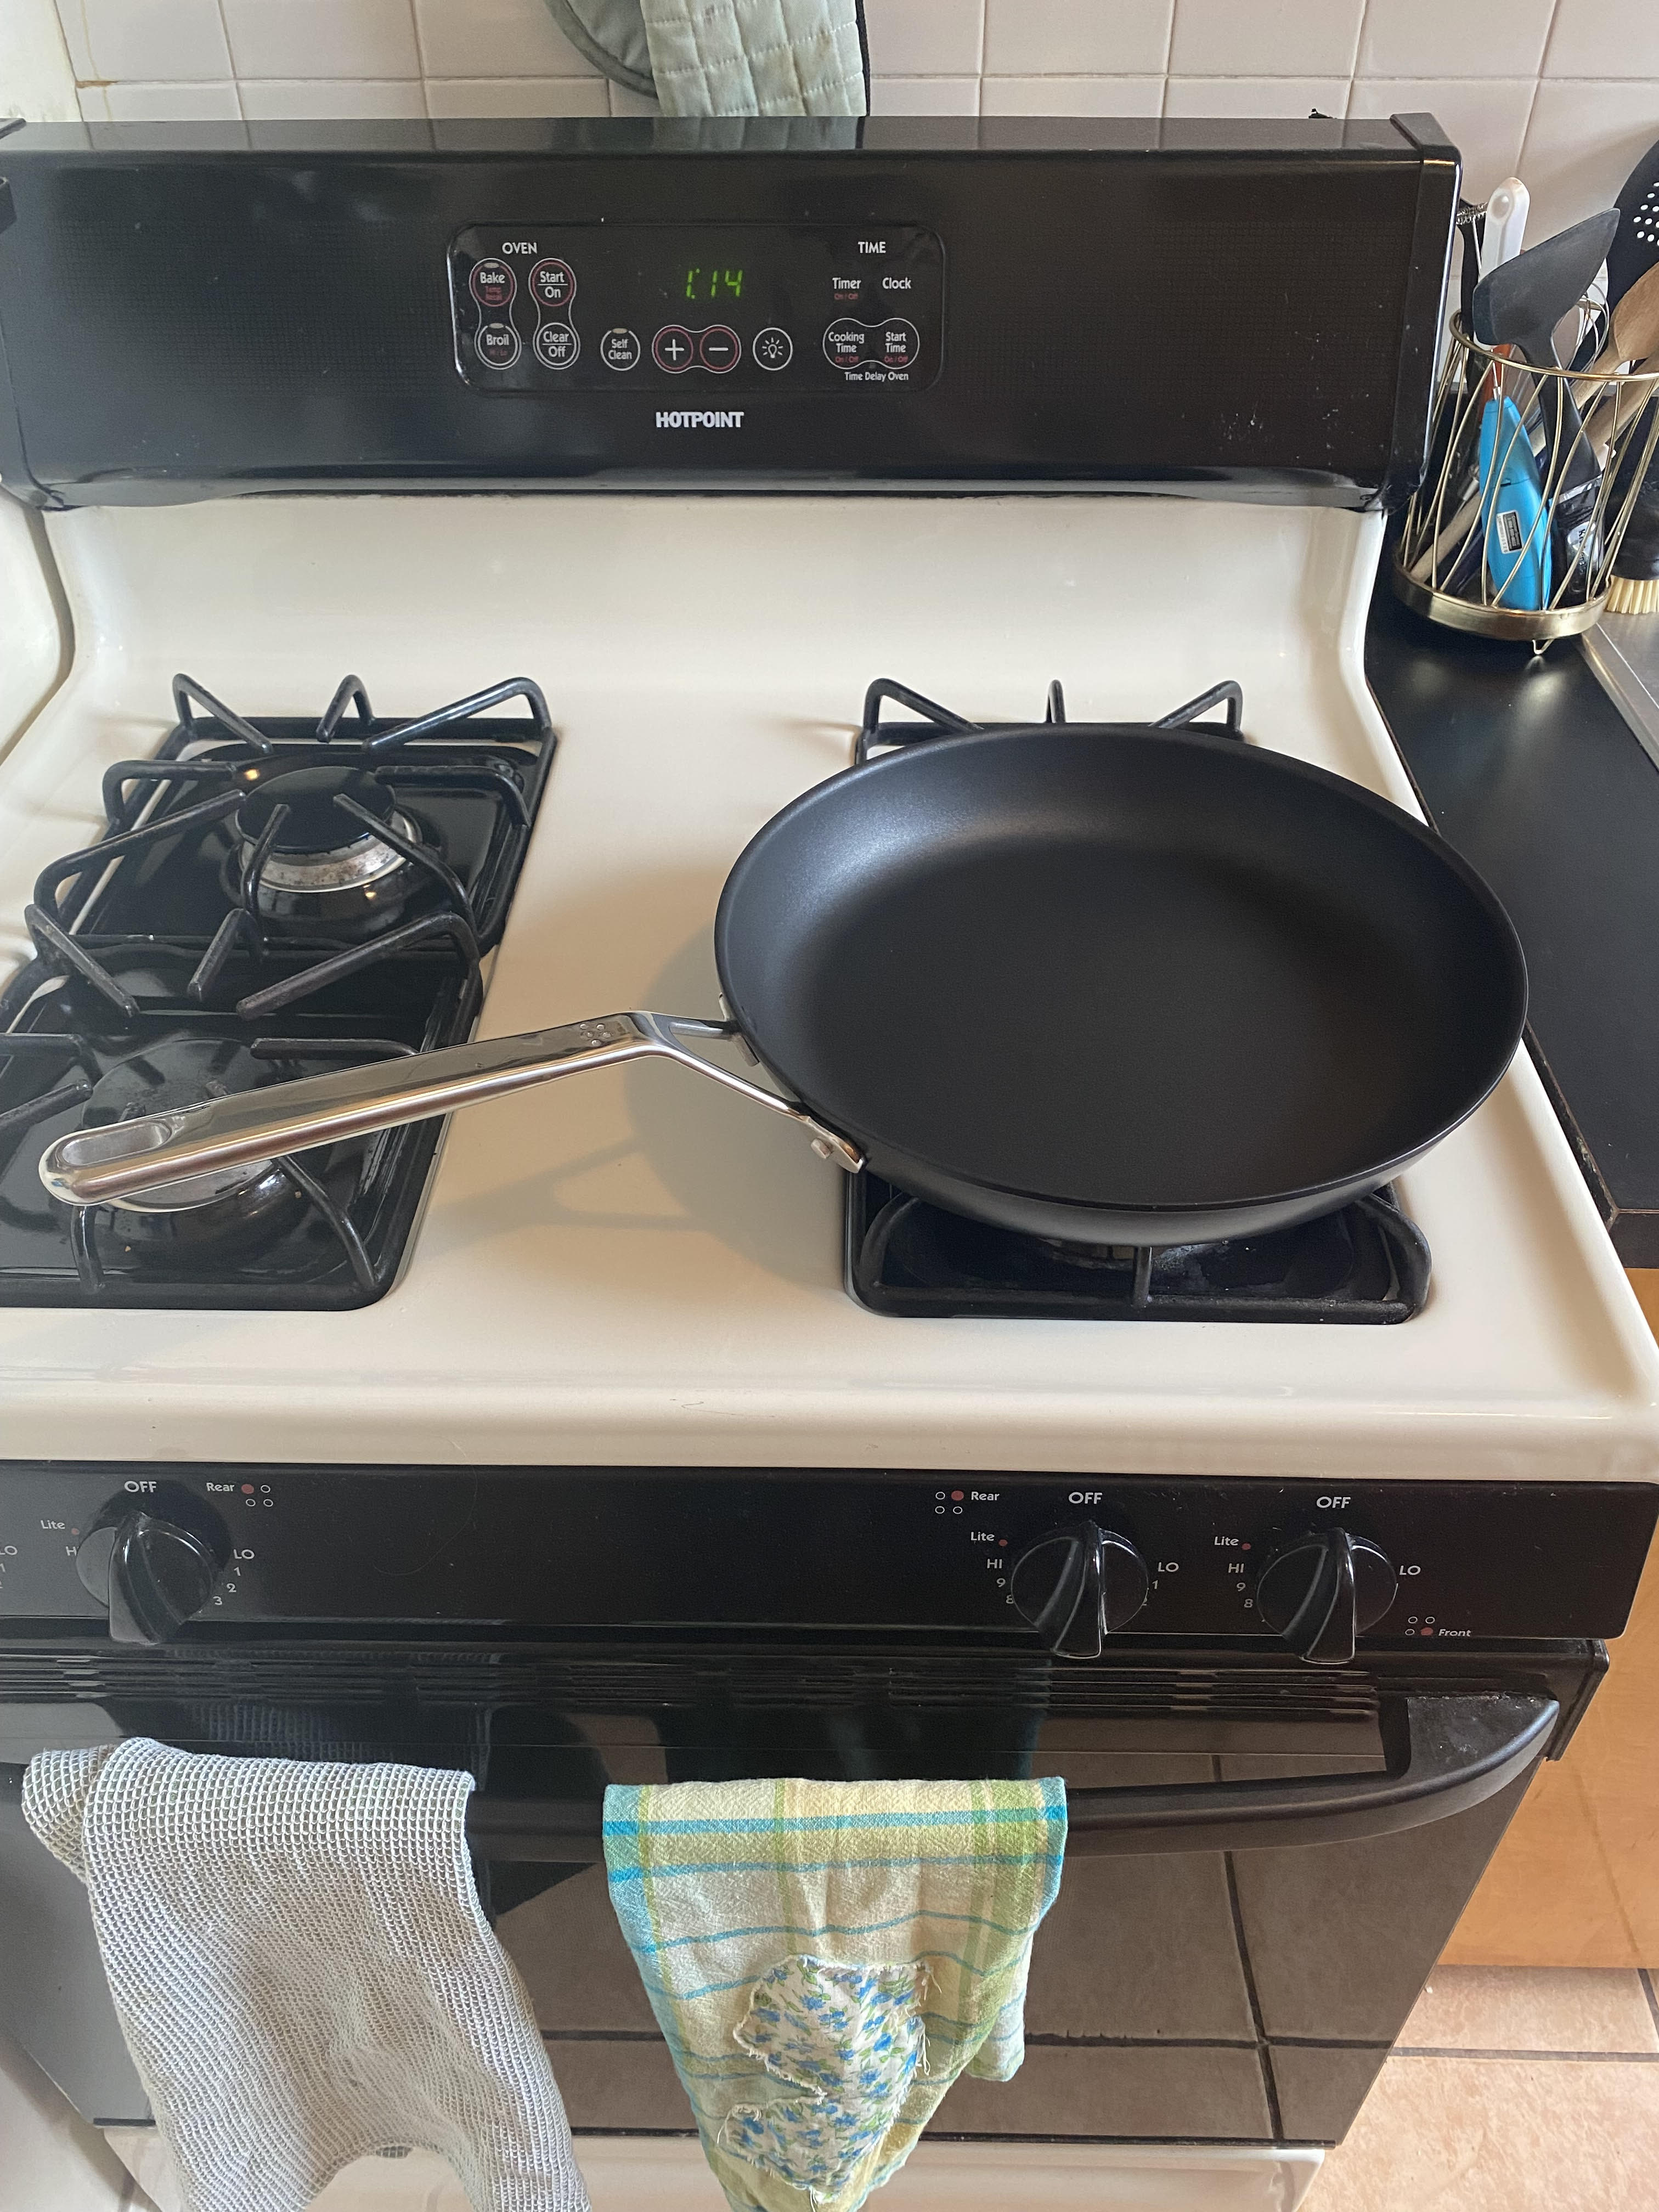 Are Misen pans worth the extra money? I'm leaning towards a $40 OXO 10” Non  stick right now : r/KitchenConfidential